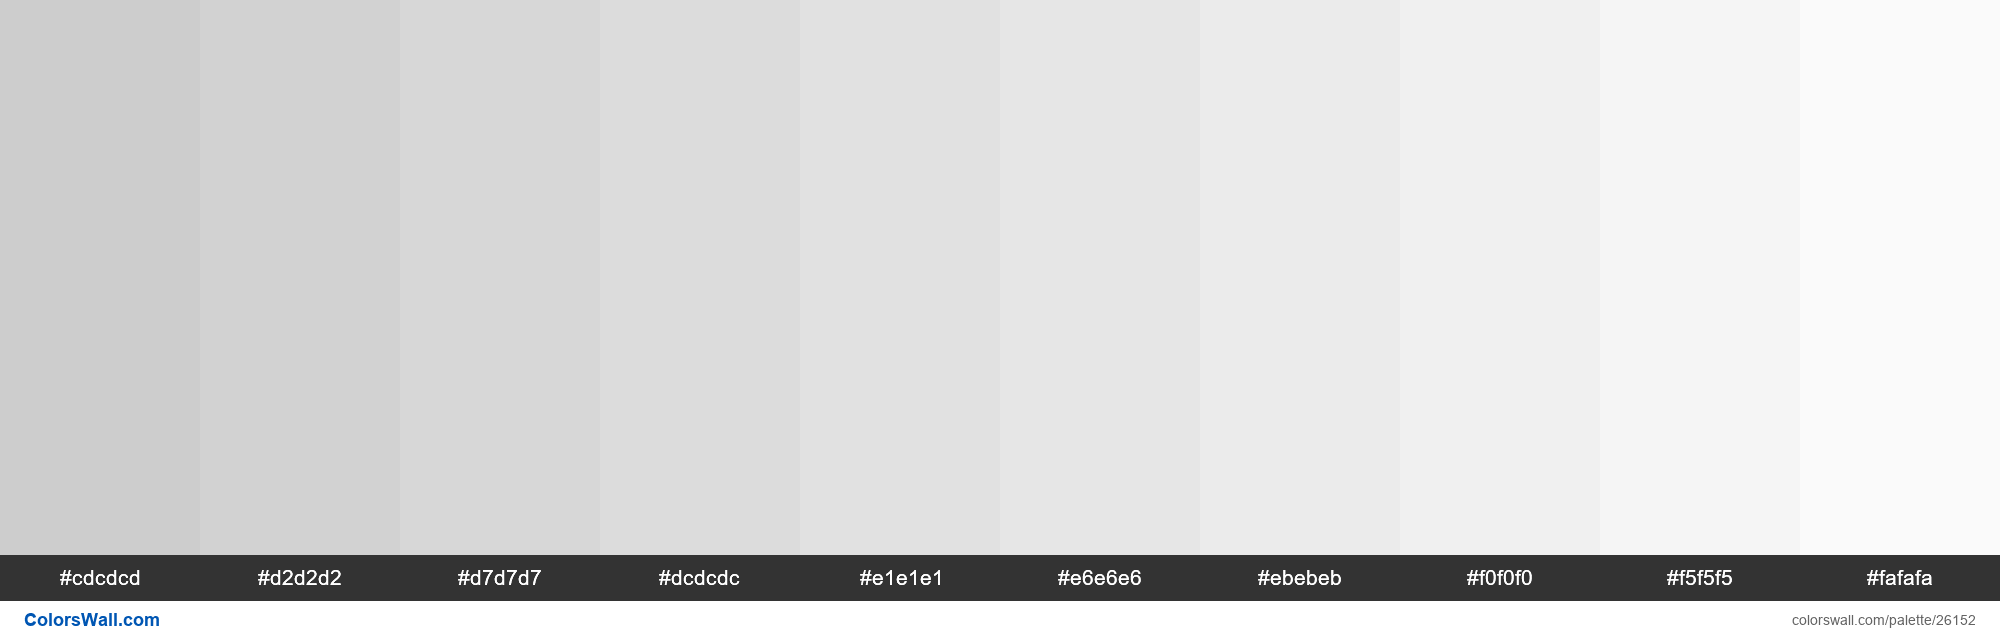 Soft Gray color hex code is #BBBDBD